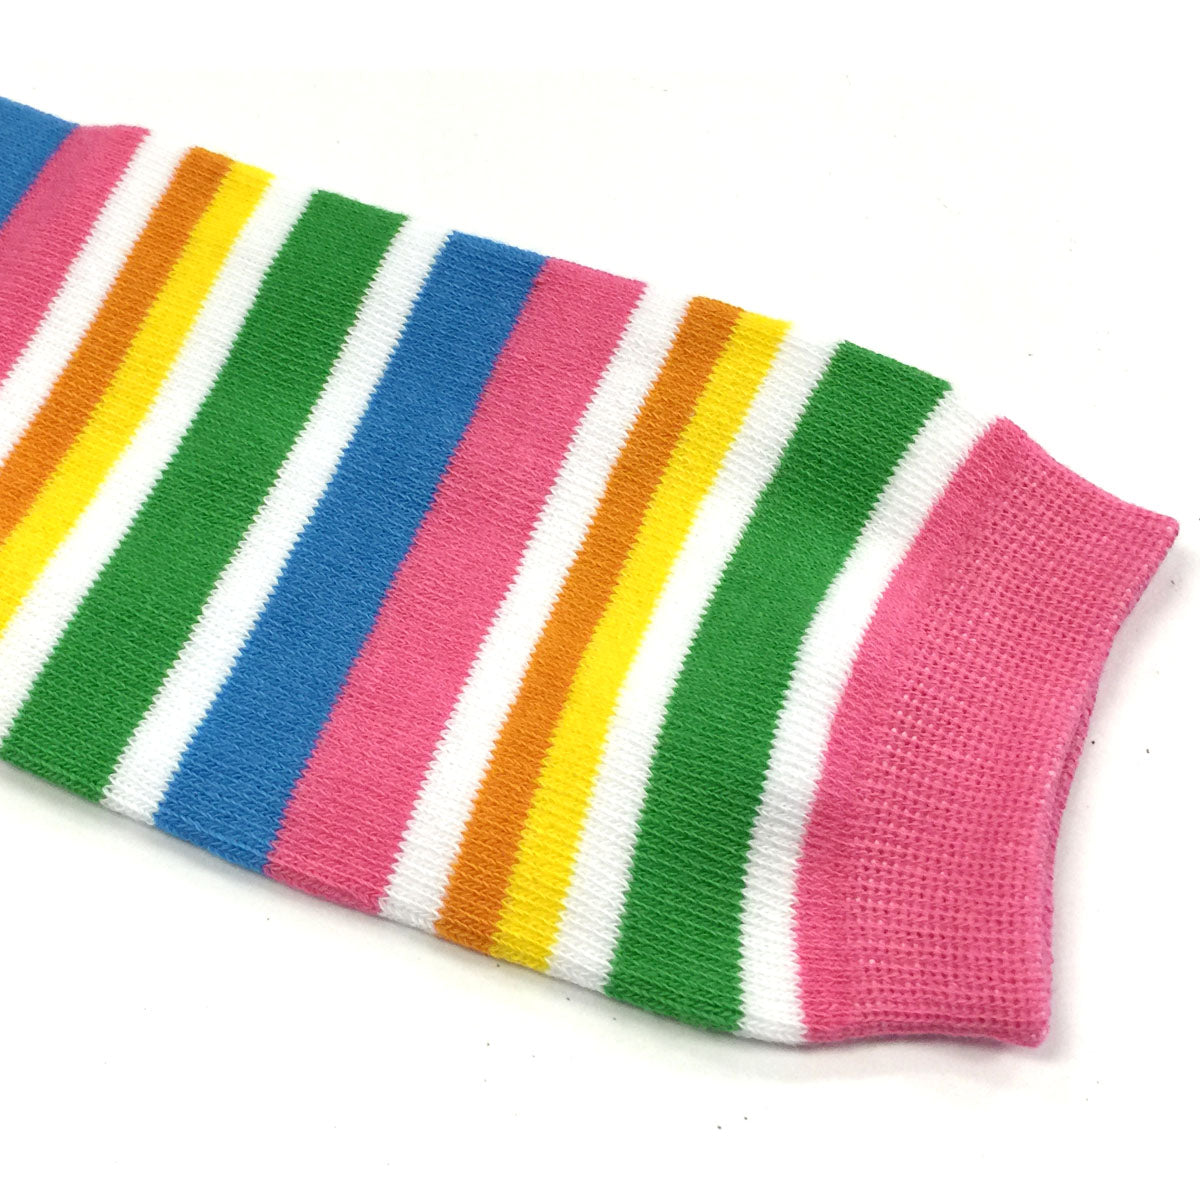 Wrapables Colorful Baby Leg Warmers Set of 4